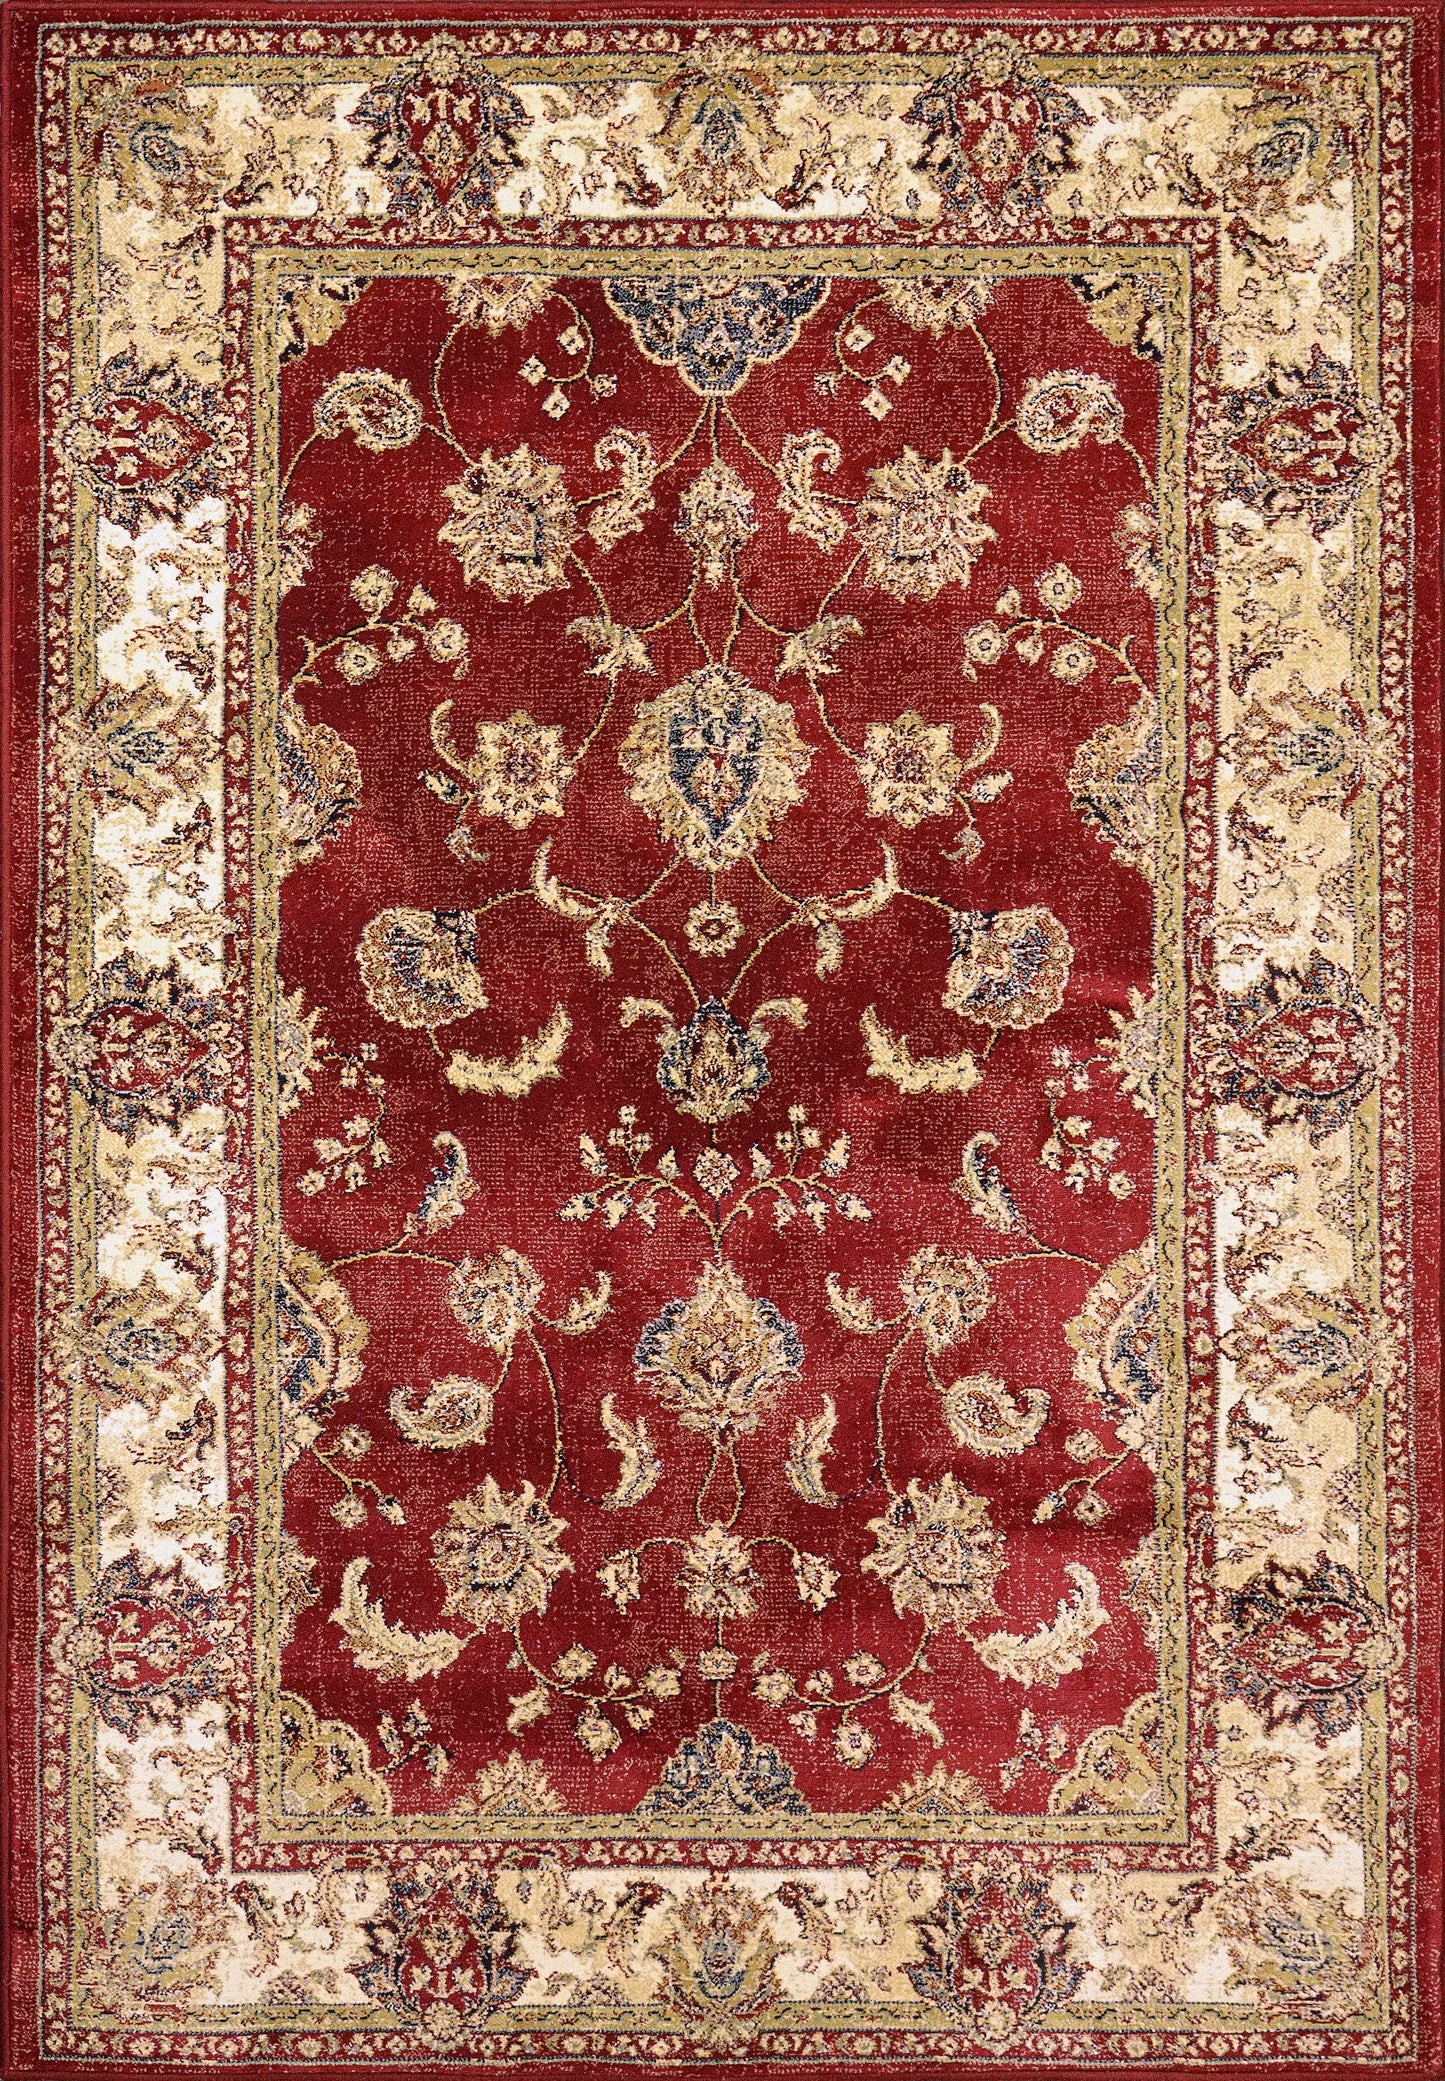 Ancient Garden 57158-1464 Red/Ivory Area Rug